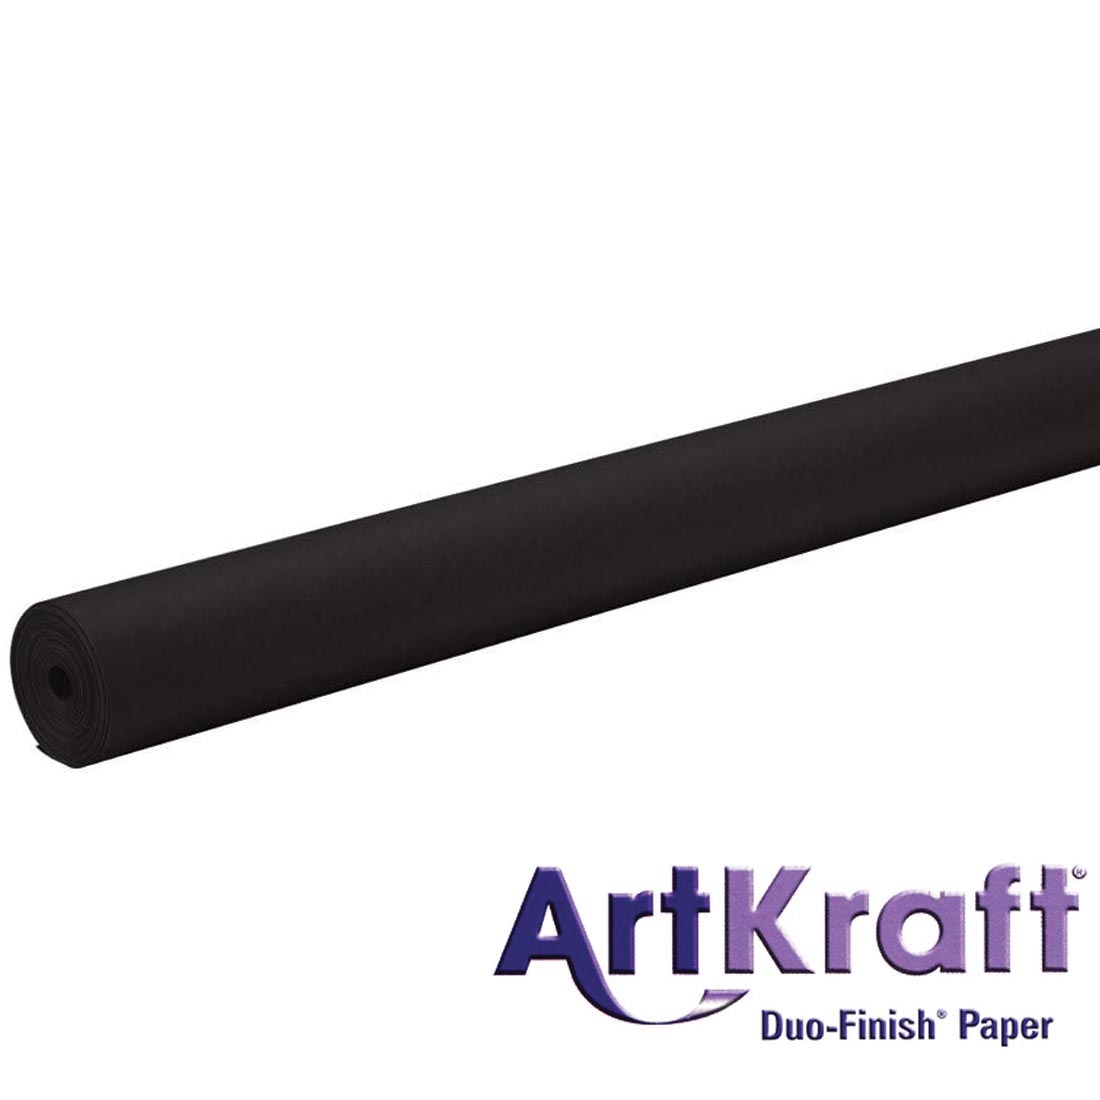 Roll of Black Paper with text ArtKraft Duo-Finish Paper